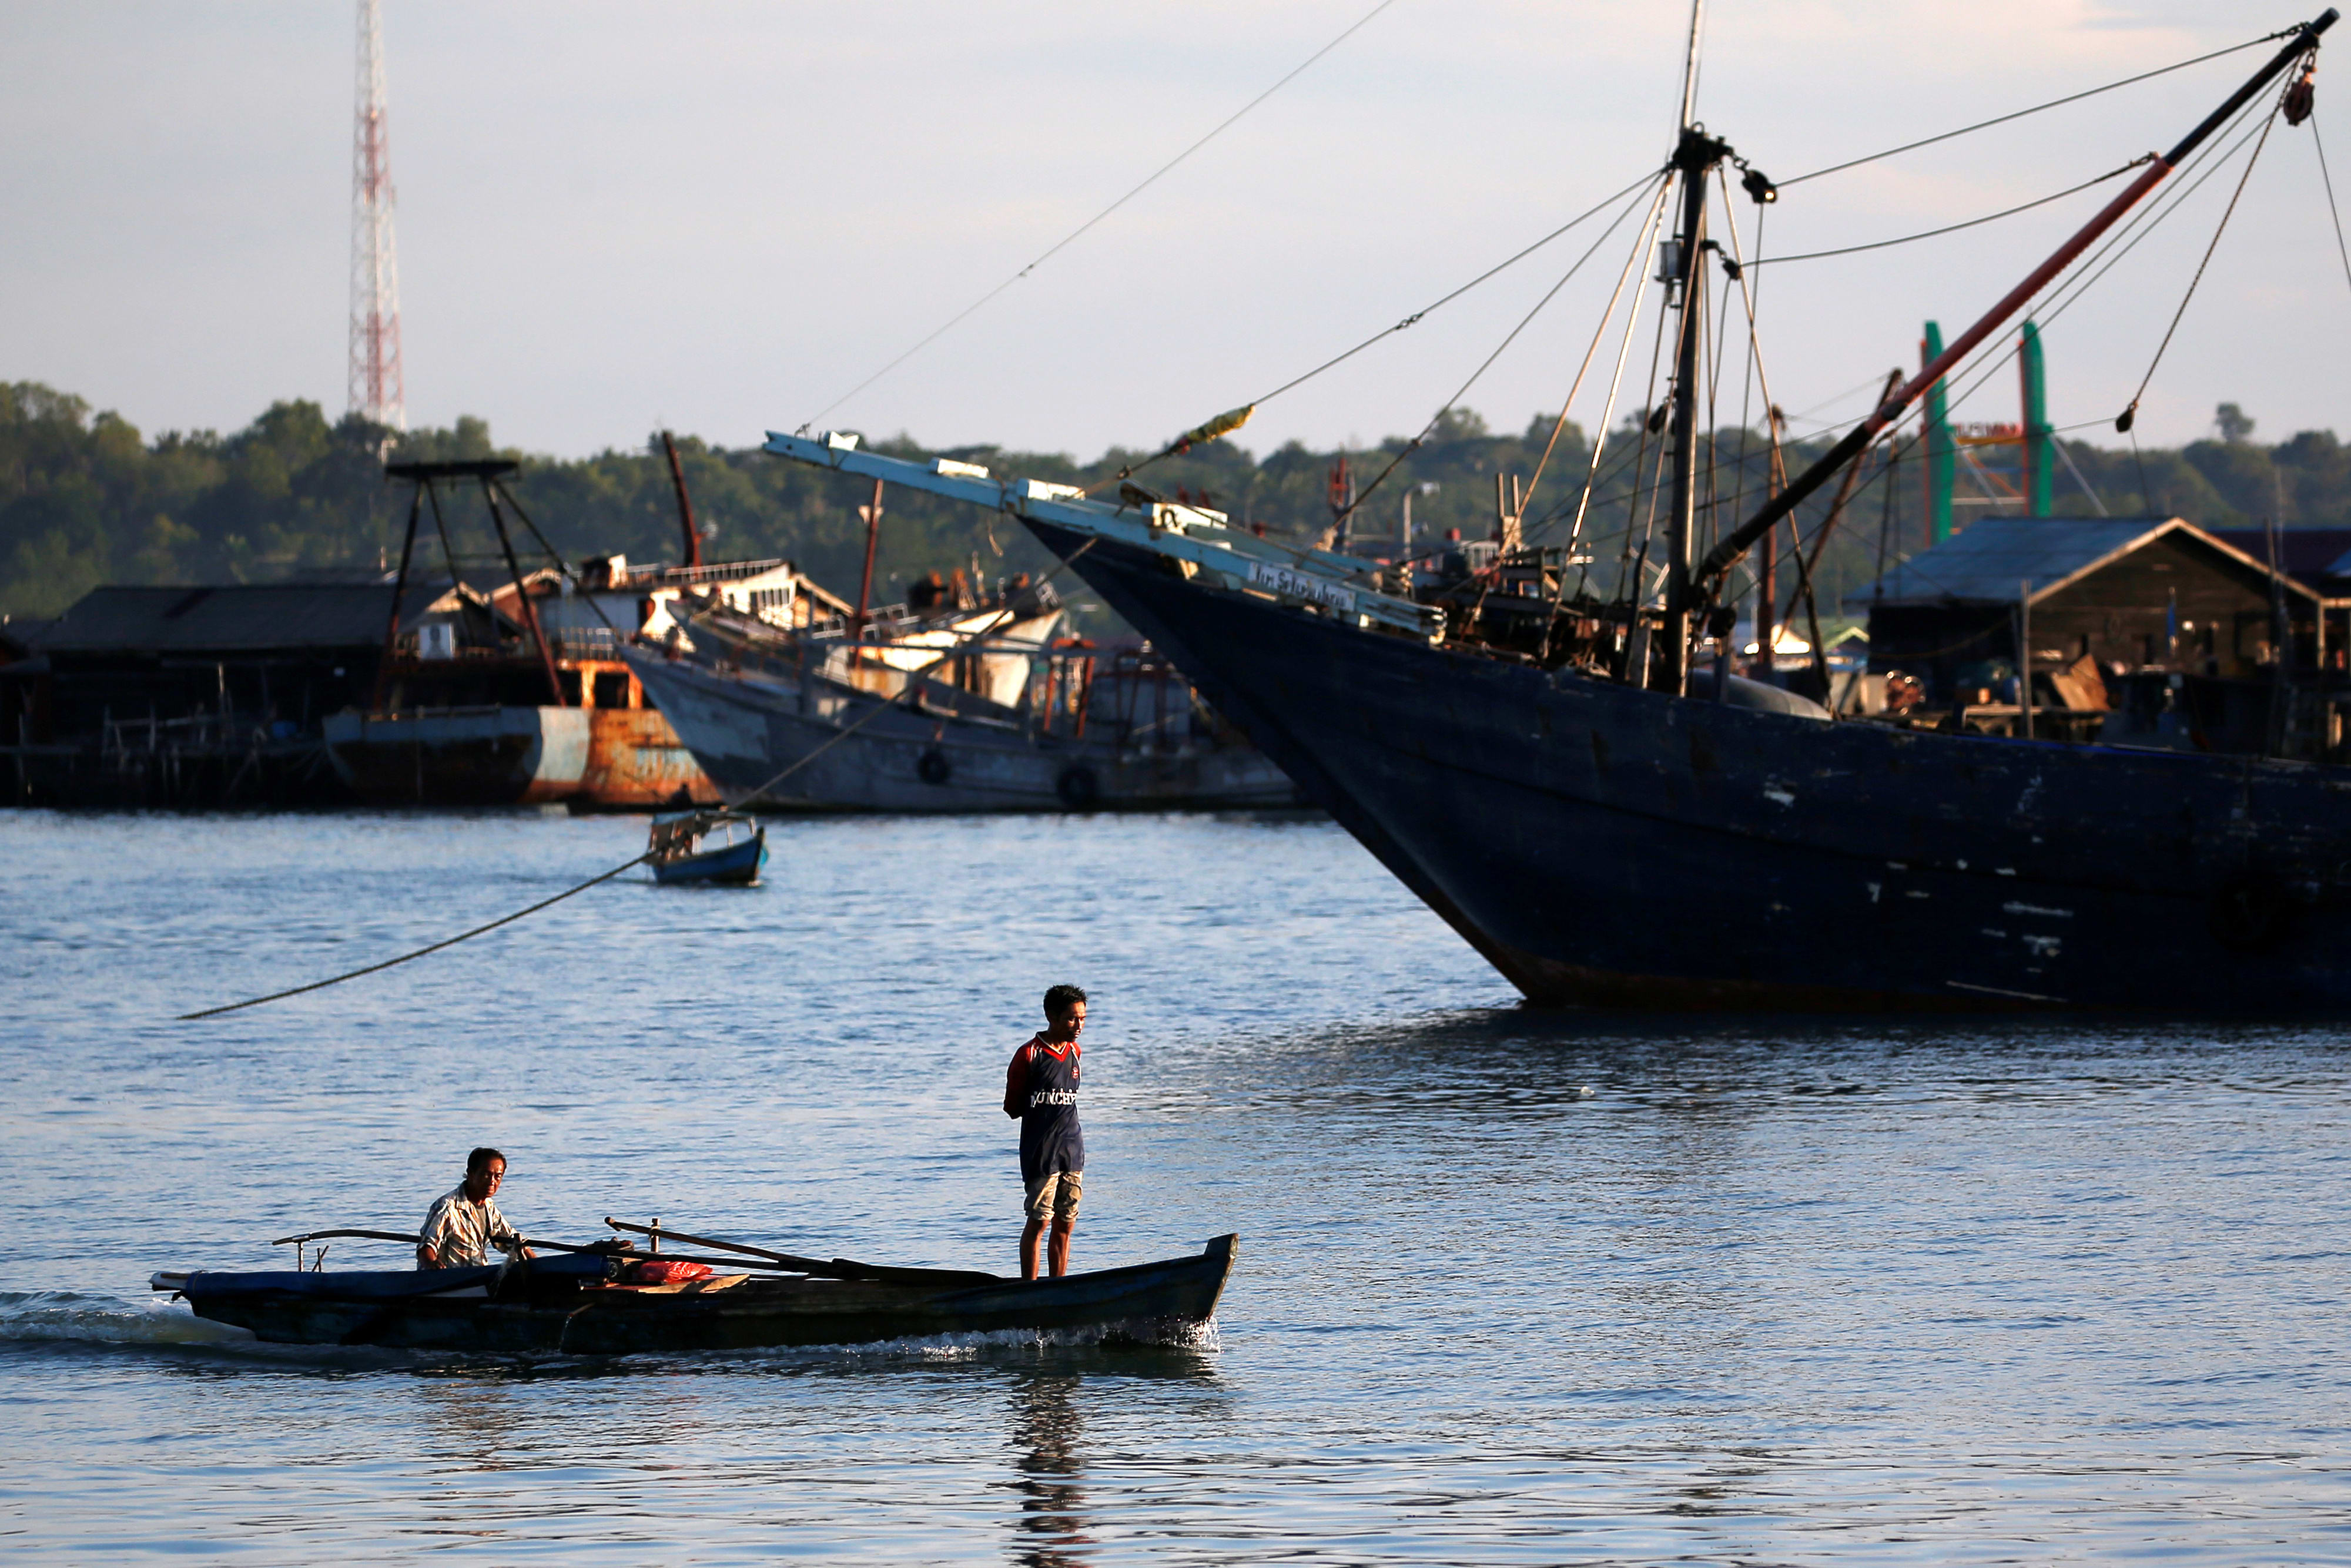 A man stands as he travels on a wooden boat near a port in Tanjung Pinang, on the island of Bintan, Indonesia on June 15, 2019. 